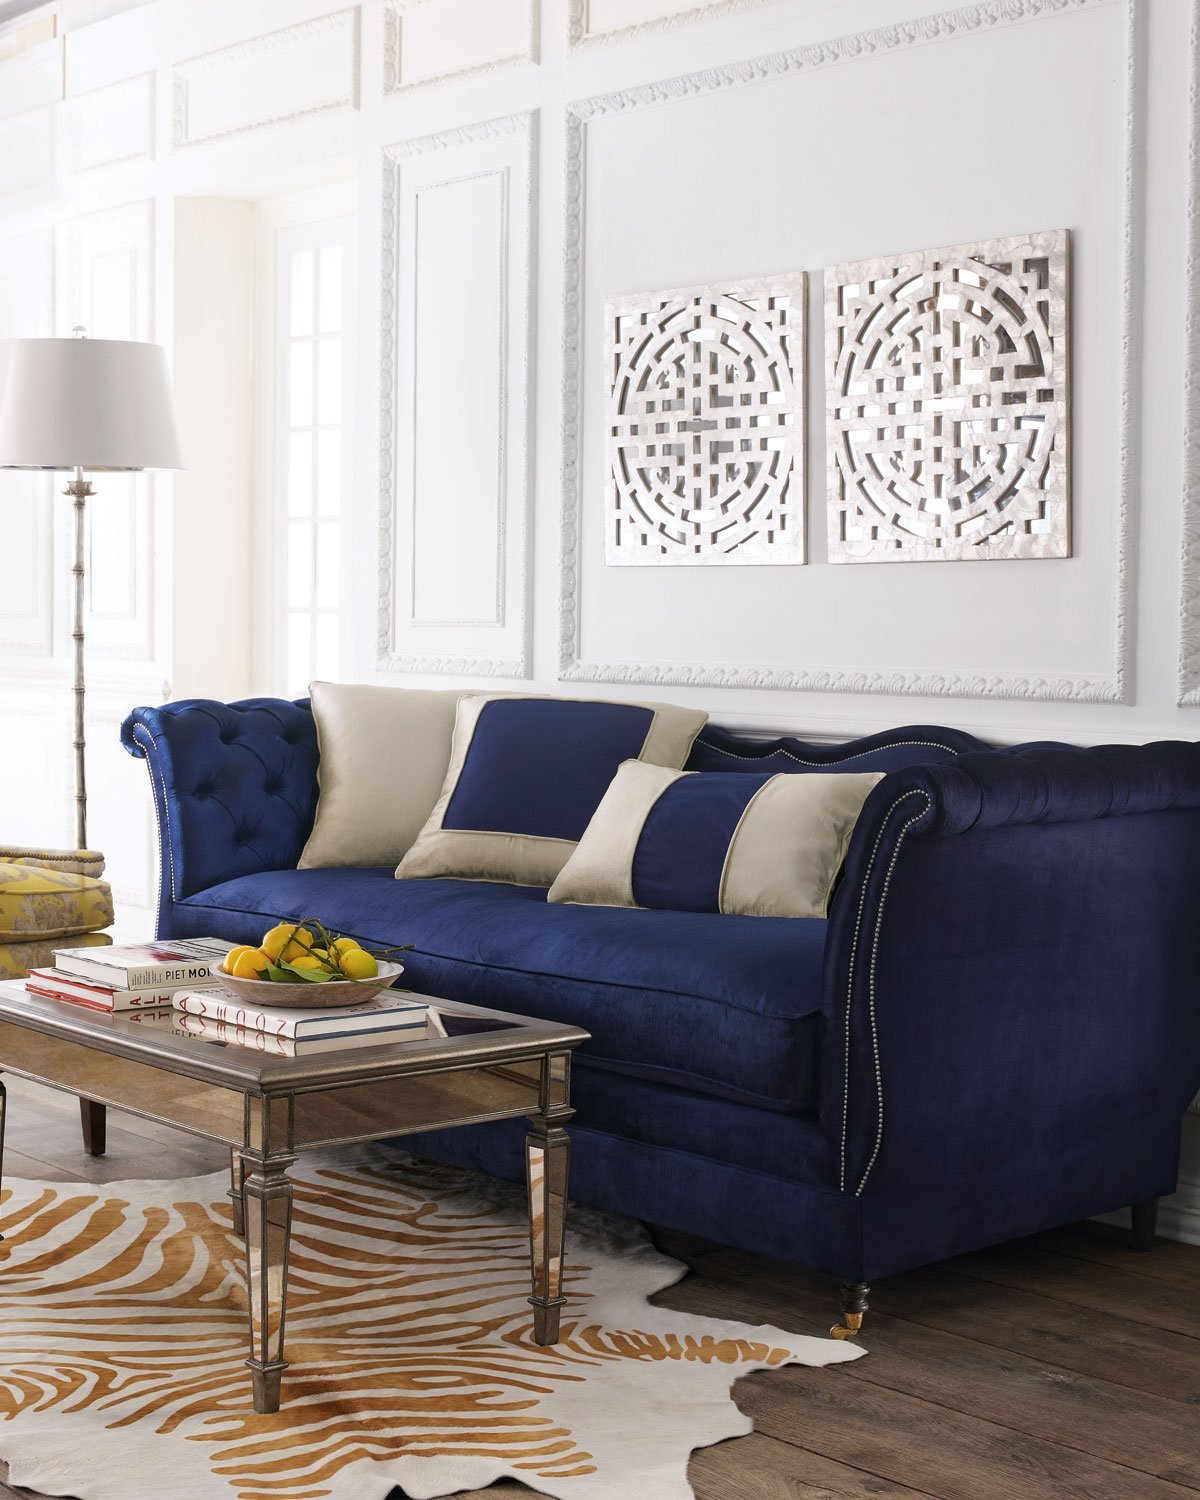 Decorate Home With Blue Velvet Sofa, What Colour Cushions Go With Dark Blue Sofa